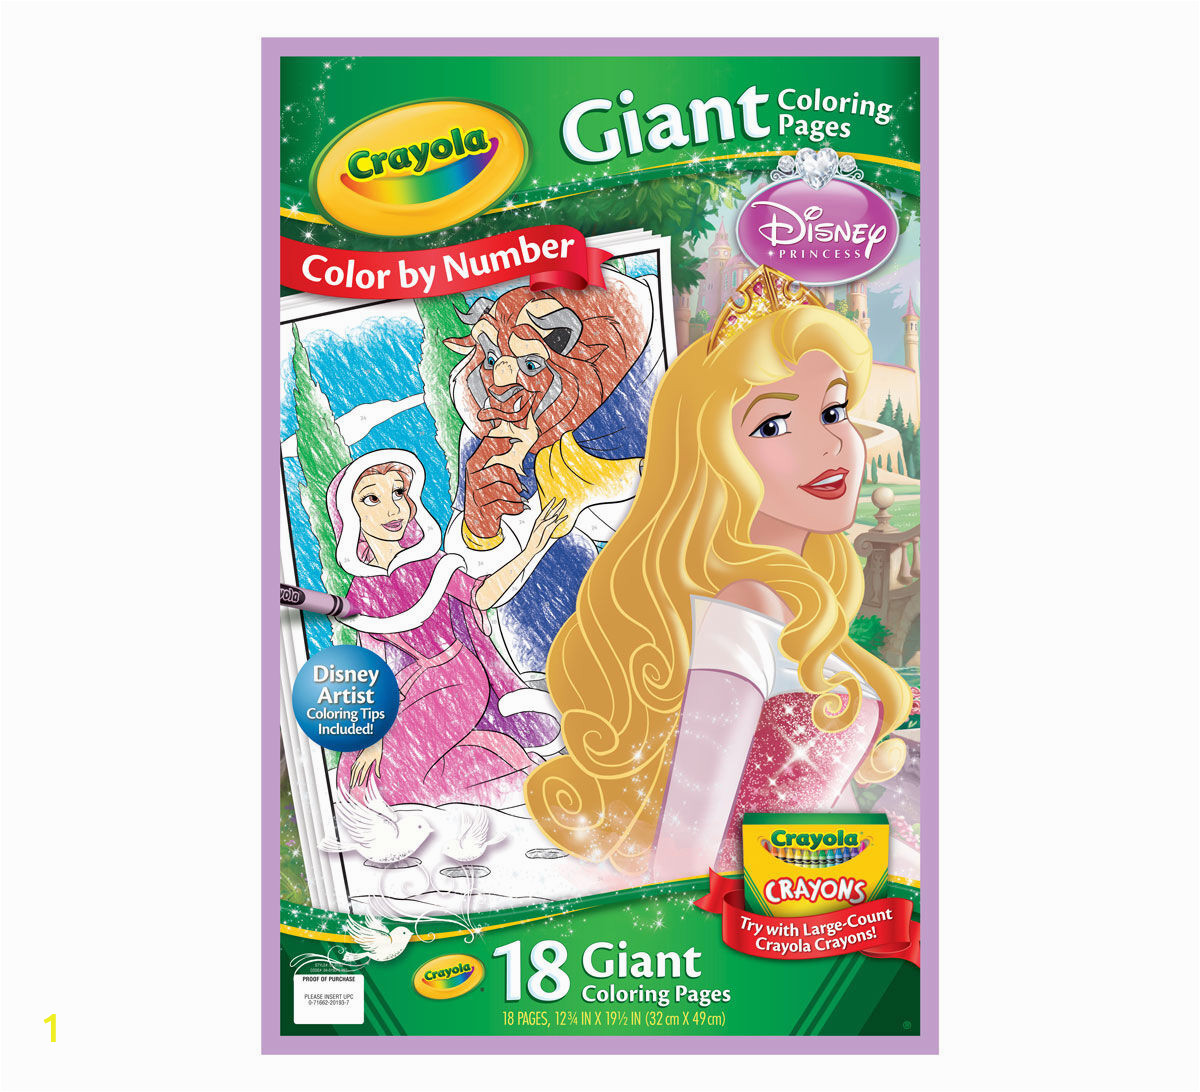 Crayola Giant Coloring Pages Disney Princess Giant Coloring Pages Disney Princess Crayola